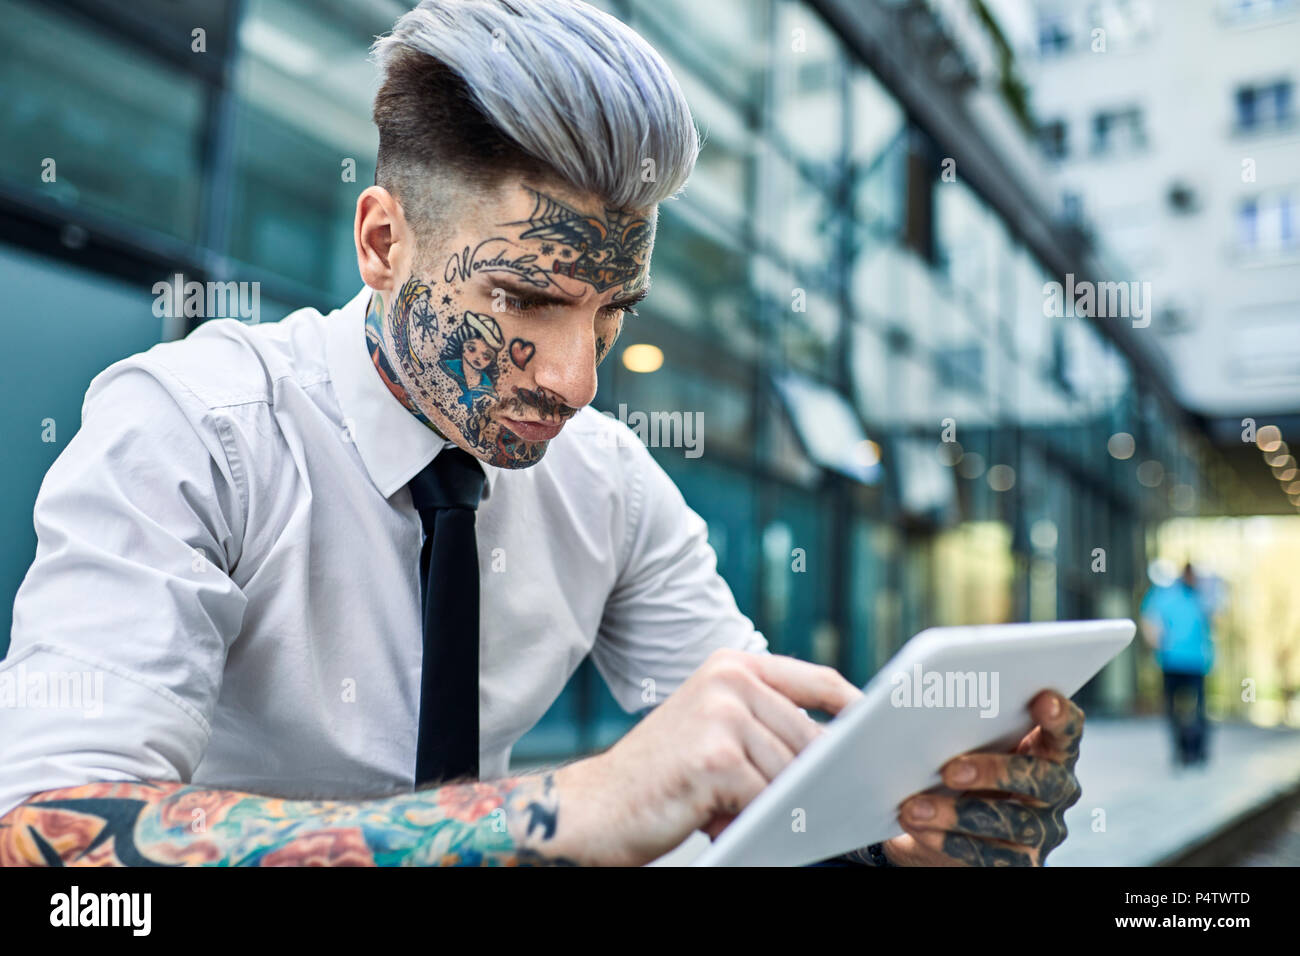 Young businessman with tattooed face talking on he phone  people  architecture  Stock Photo  270999670